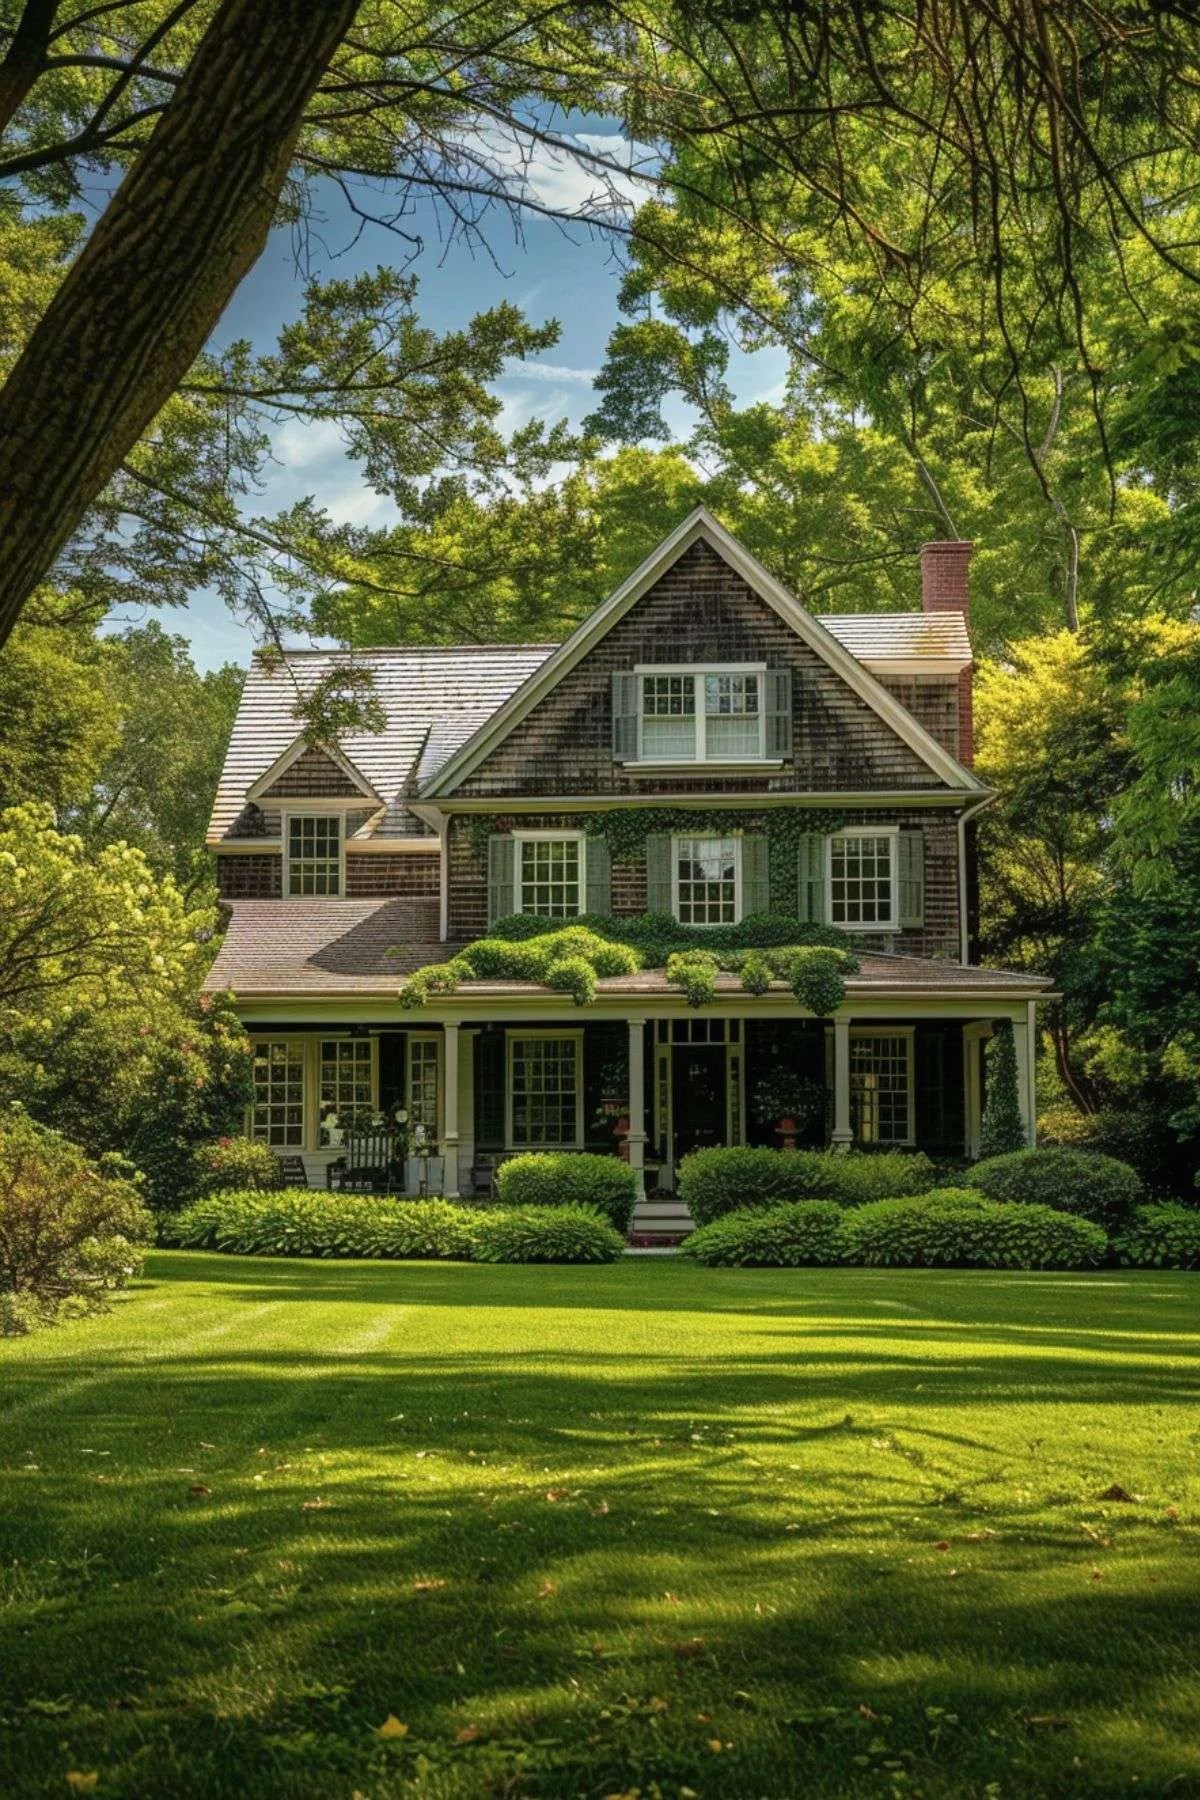 Design Tips for Beautiful Historic Homes on the East Coast of the U.S.